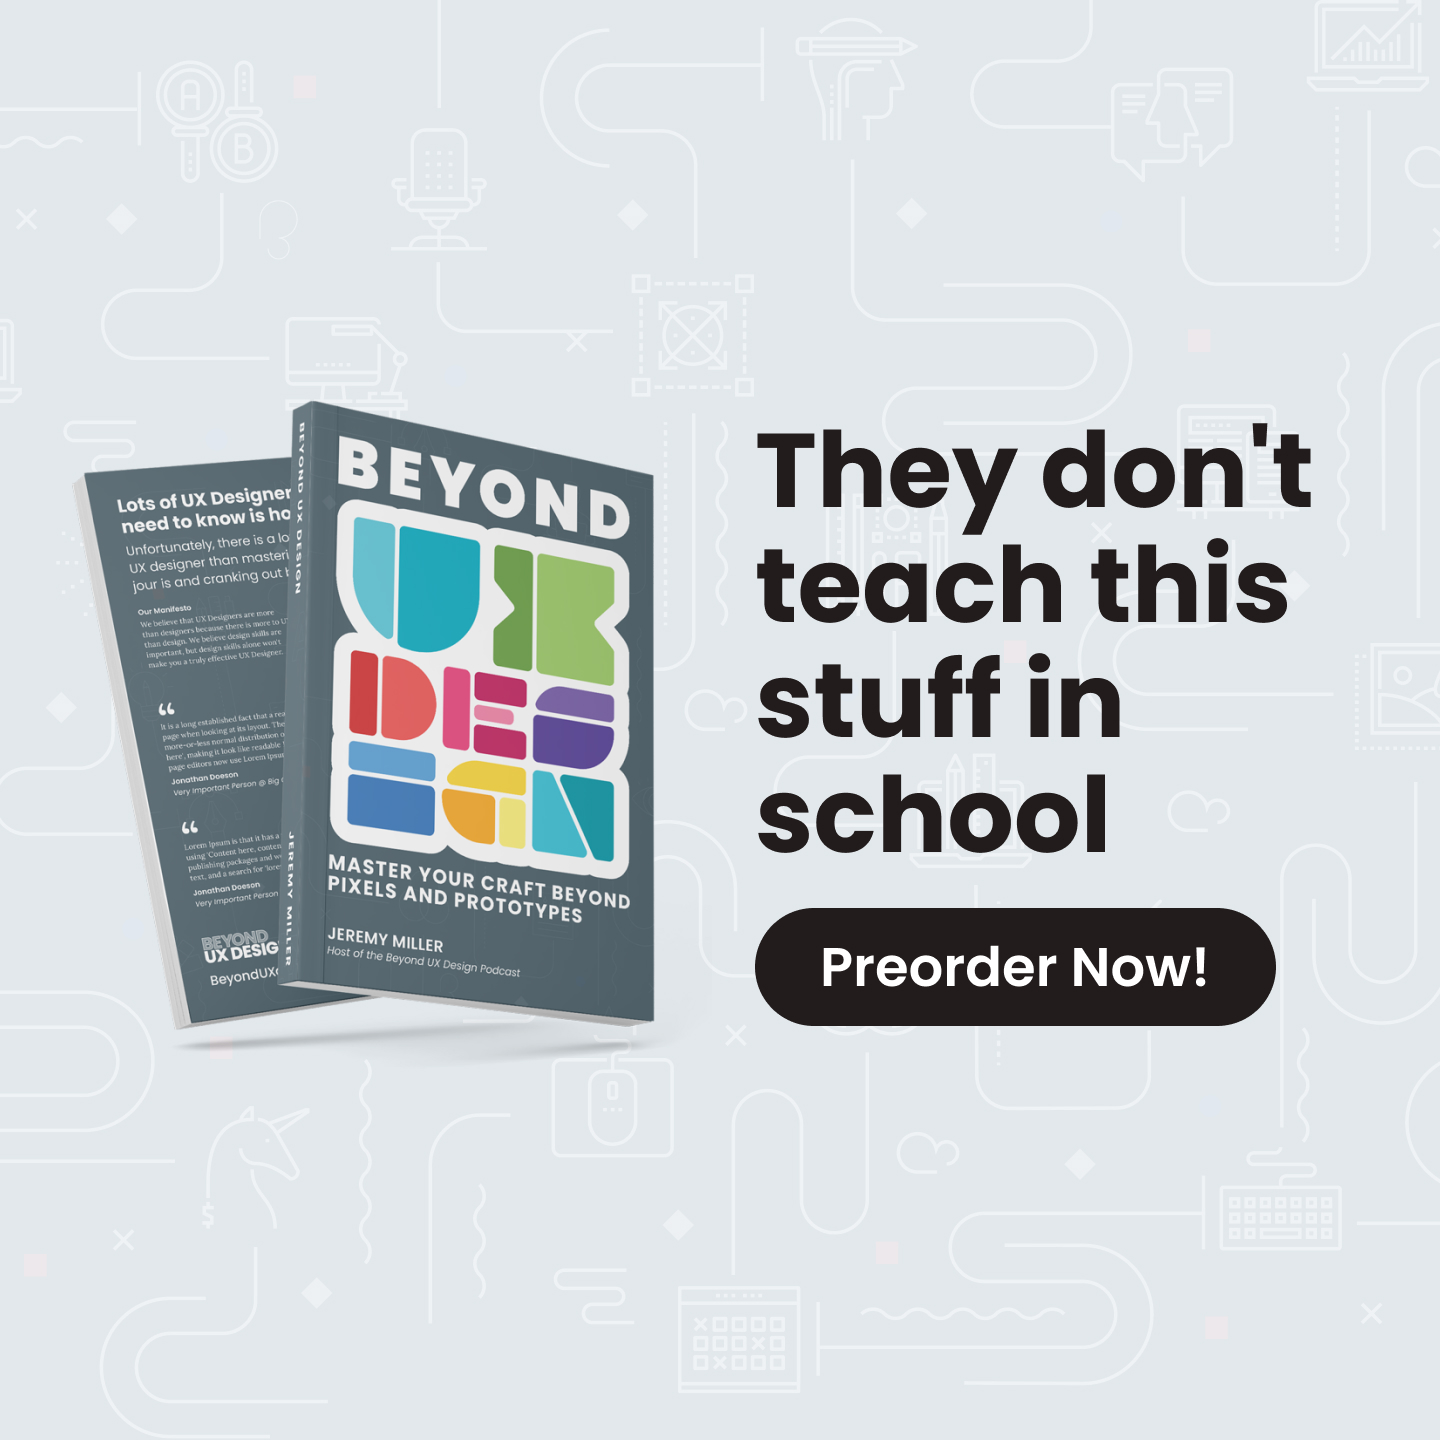 Announcing the Beyond UX Design Book!